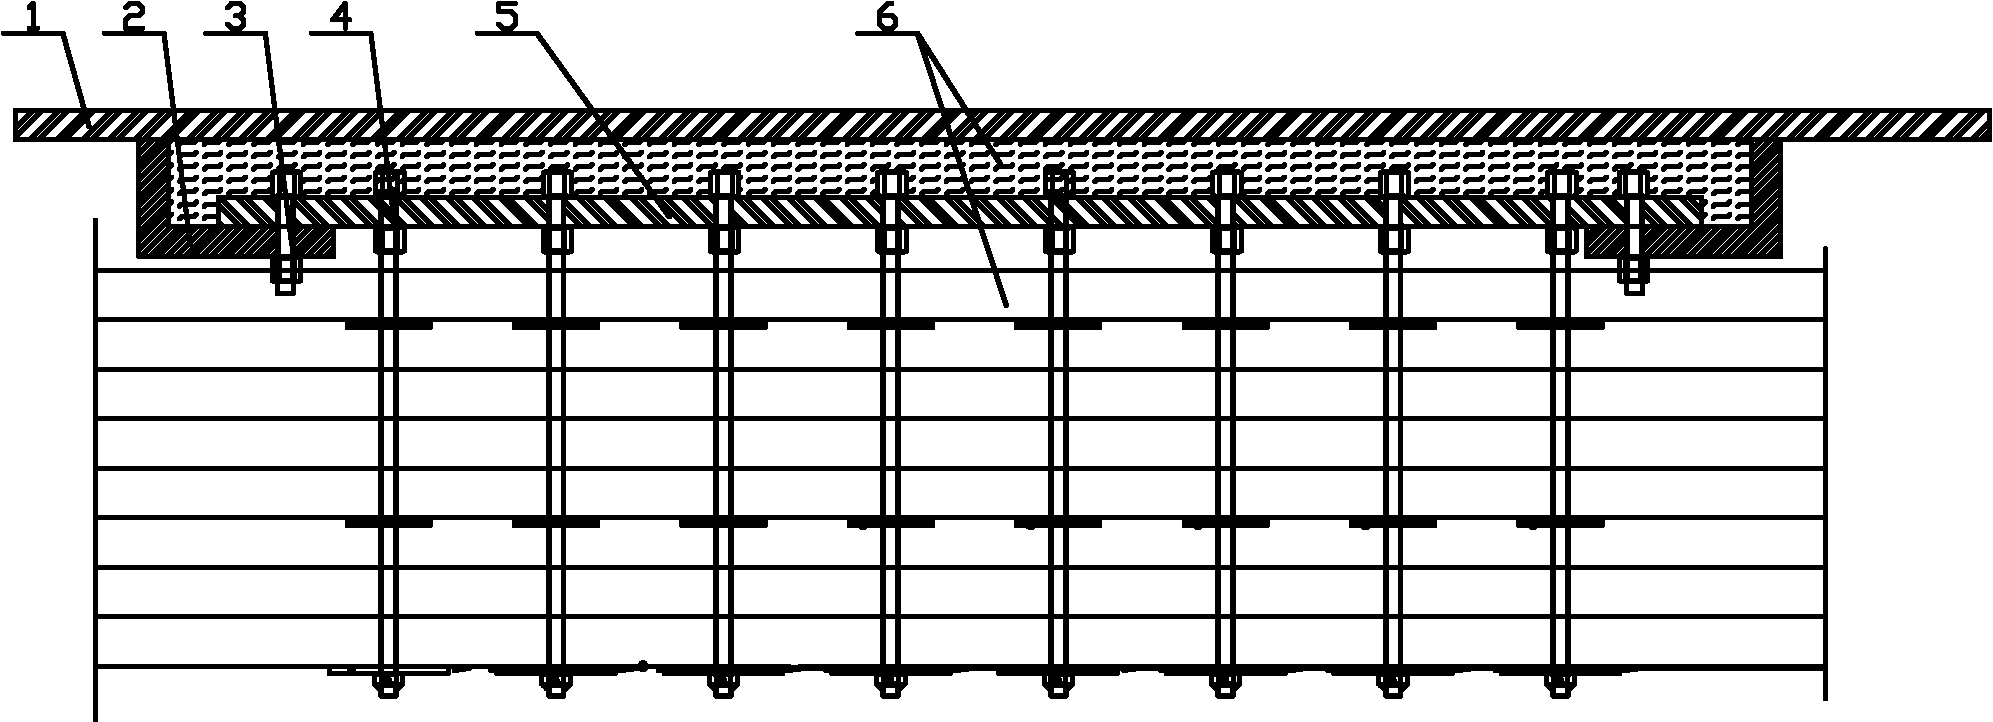 Energy efficient fixture method for anchor nail